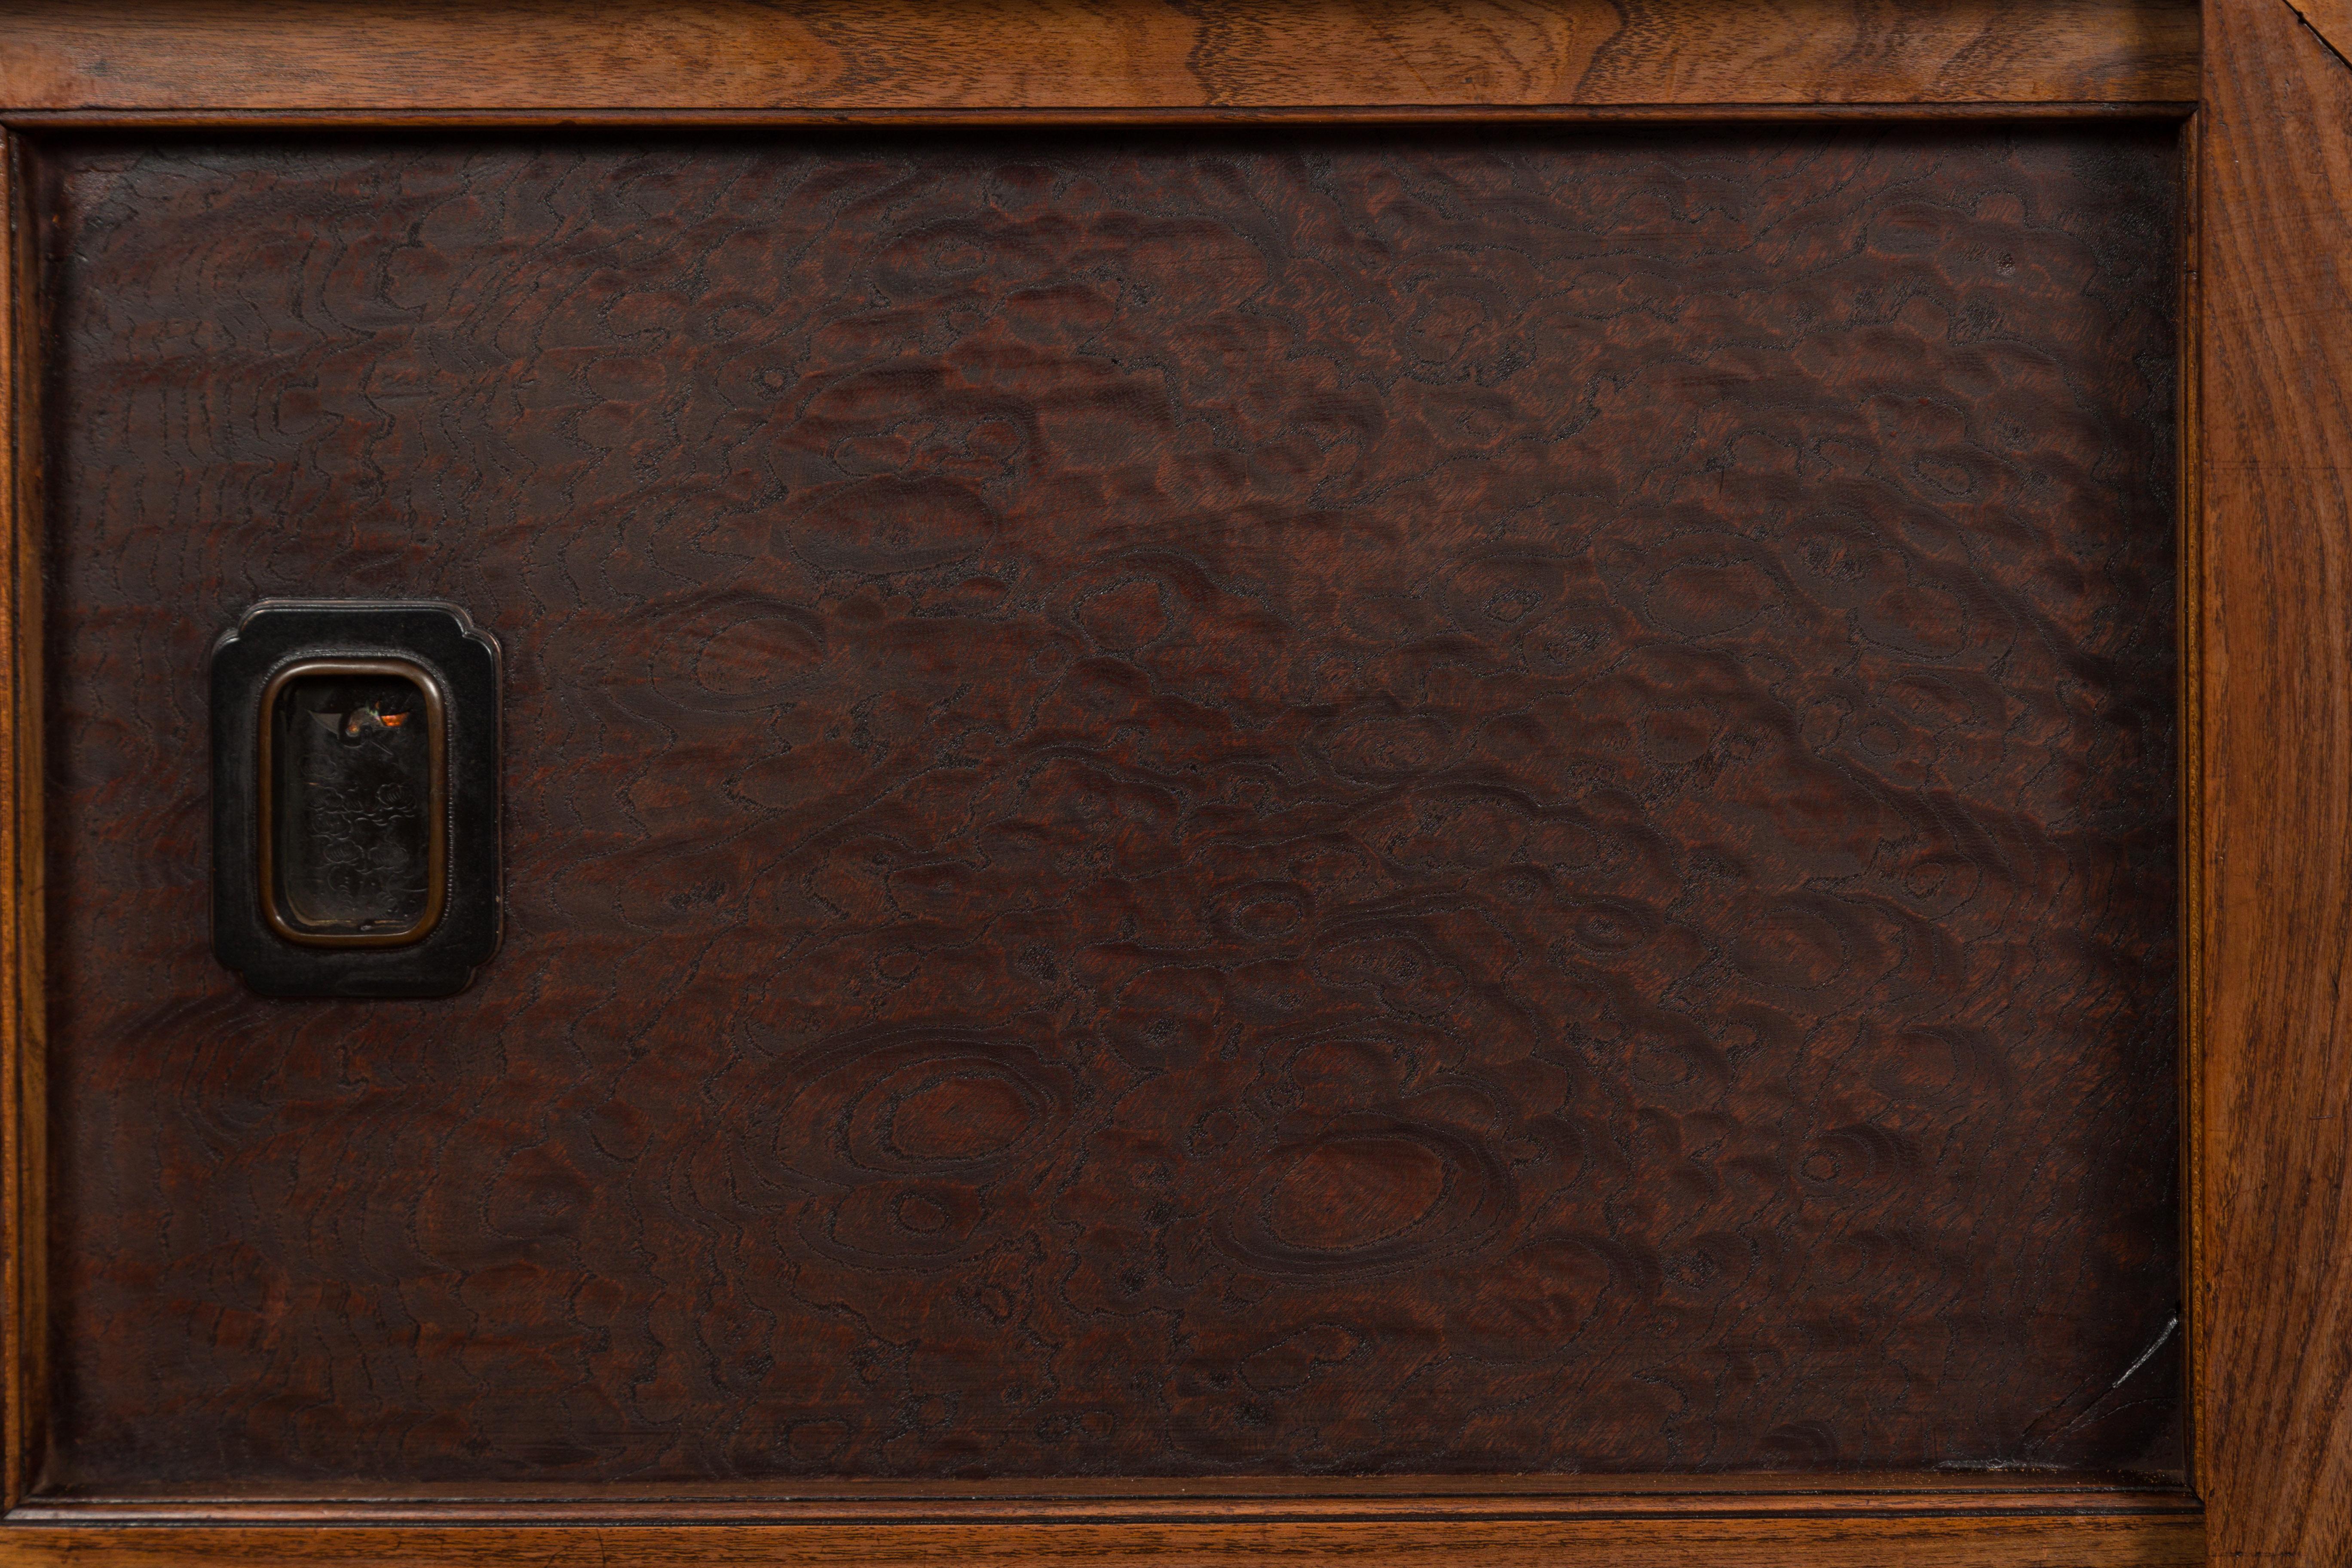 Japanese Meiji Period 19th Century Tansu Chest with Sliding Chest and Drawers For Sale 8